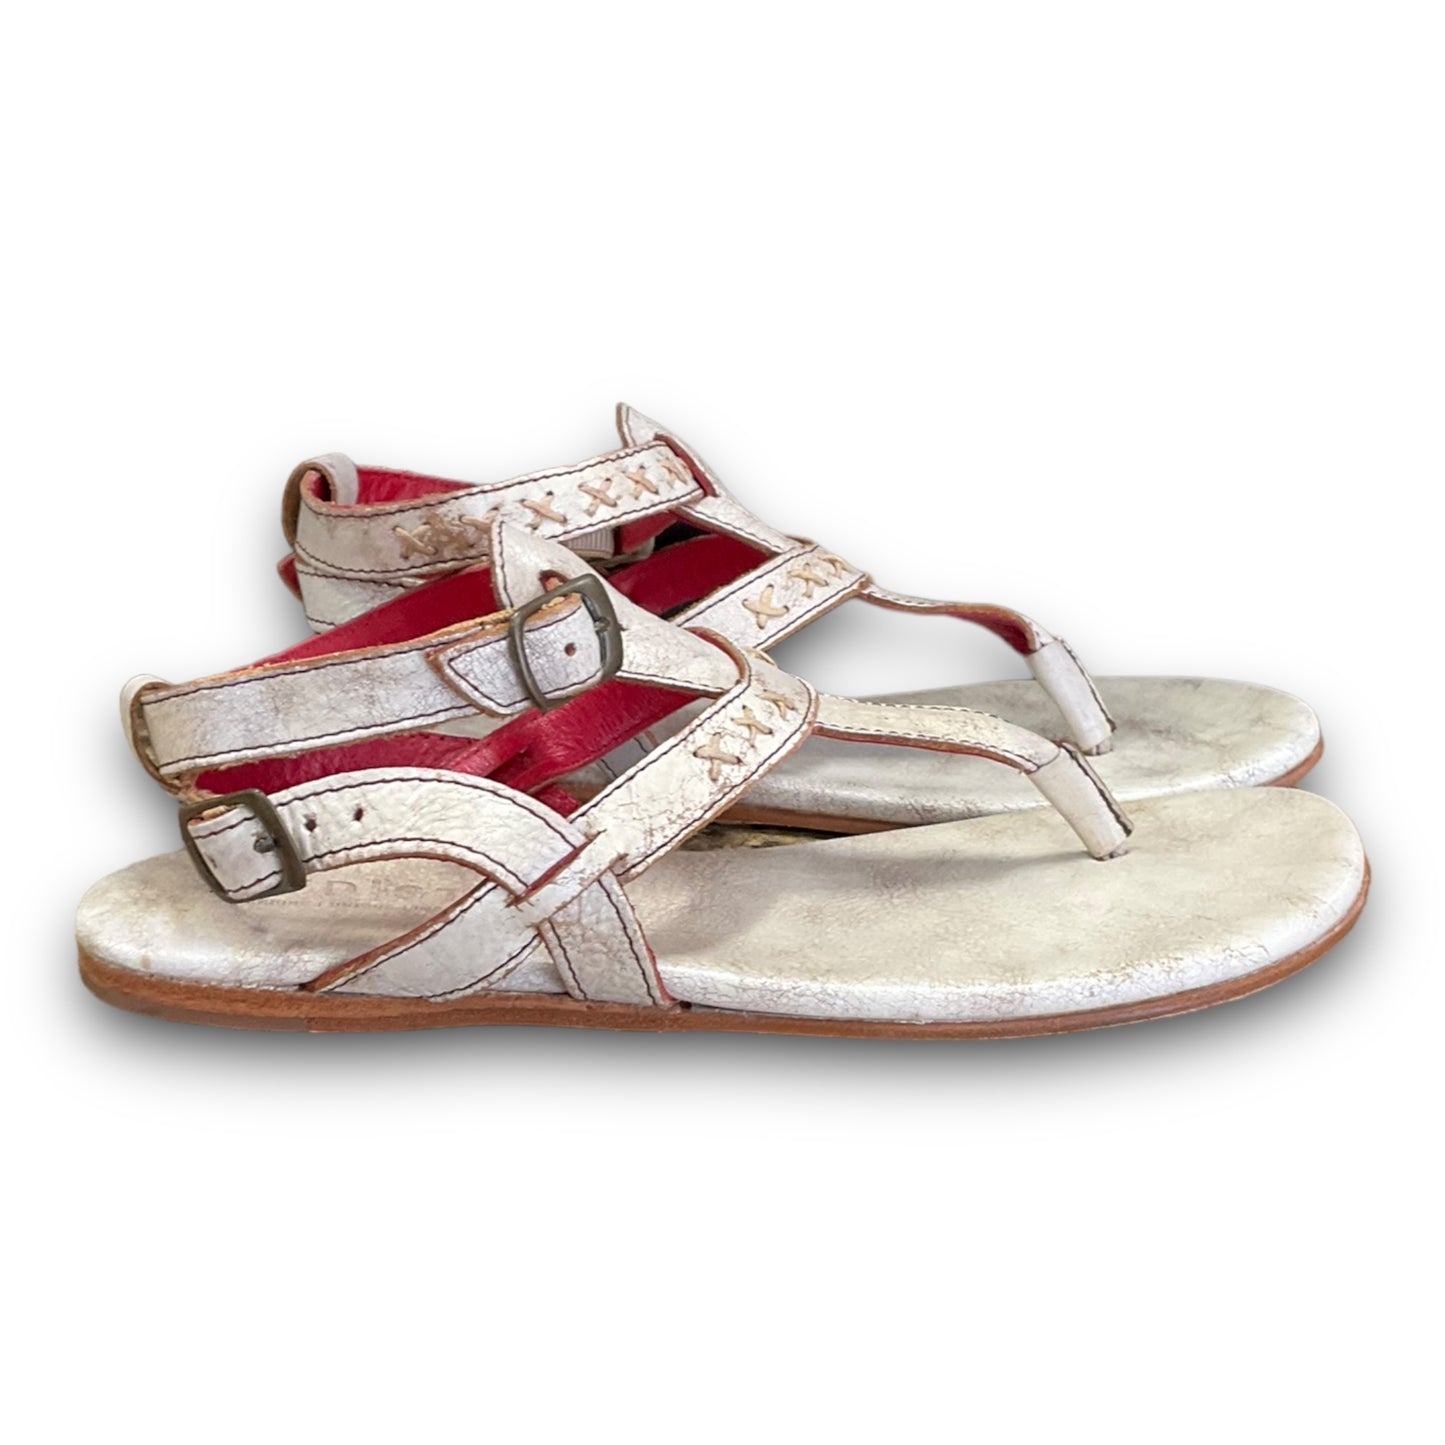 Sandals Flats By Bed Stu  Size: 8.5